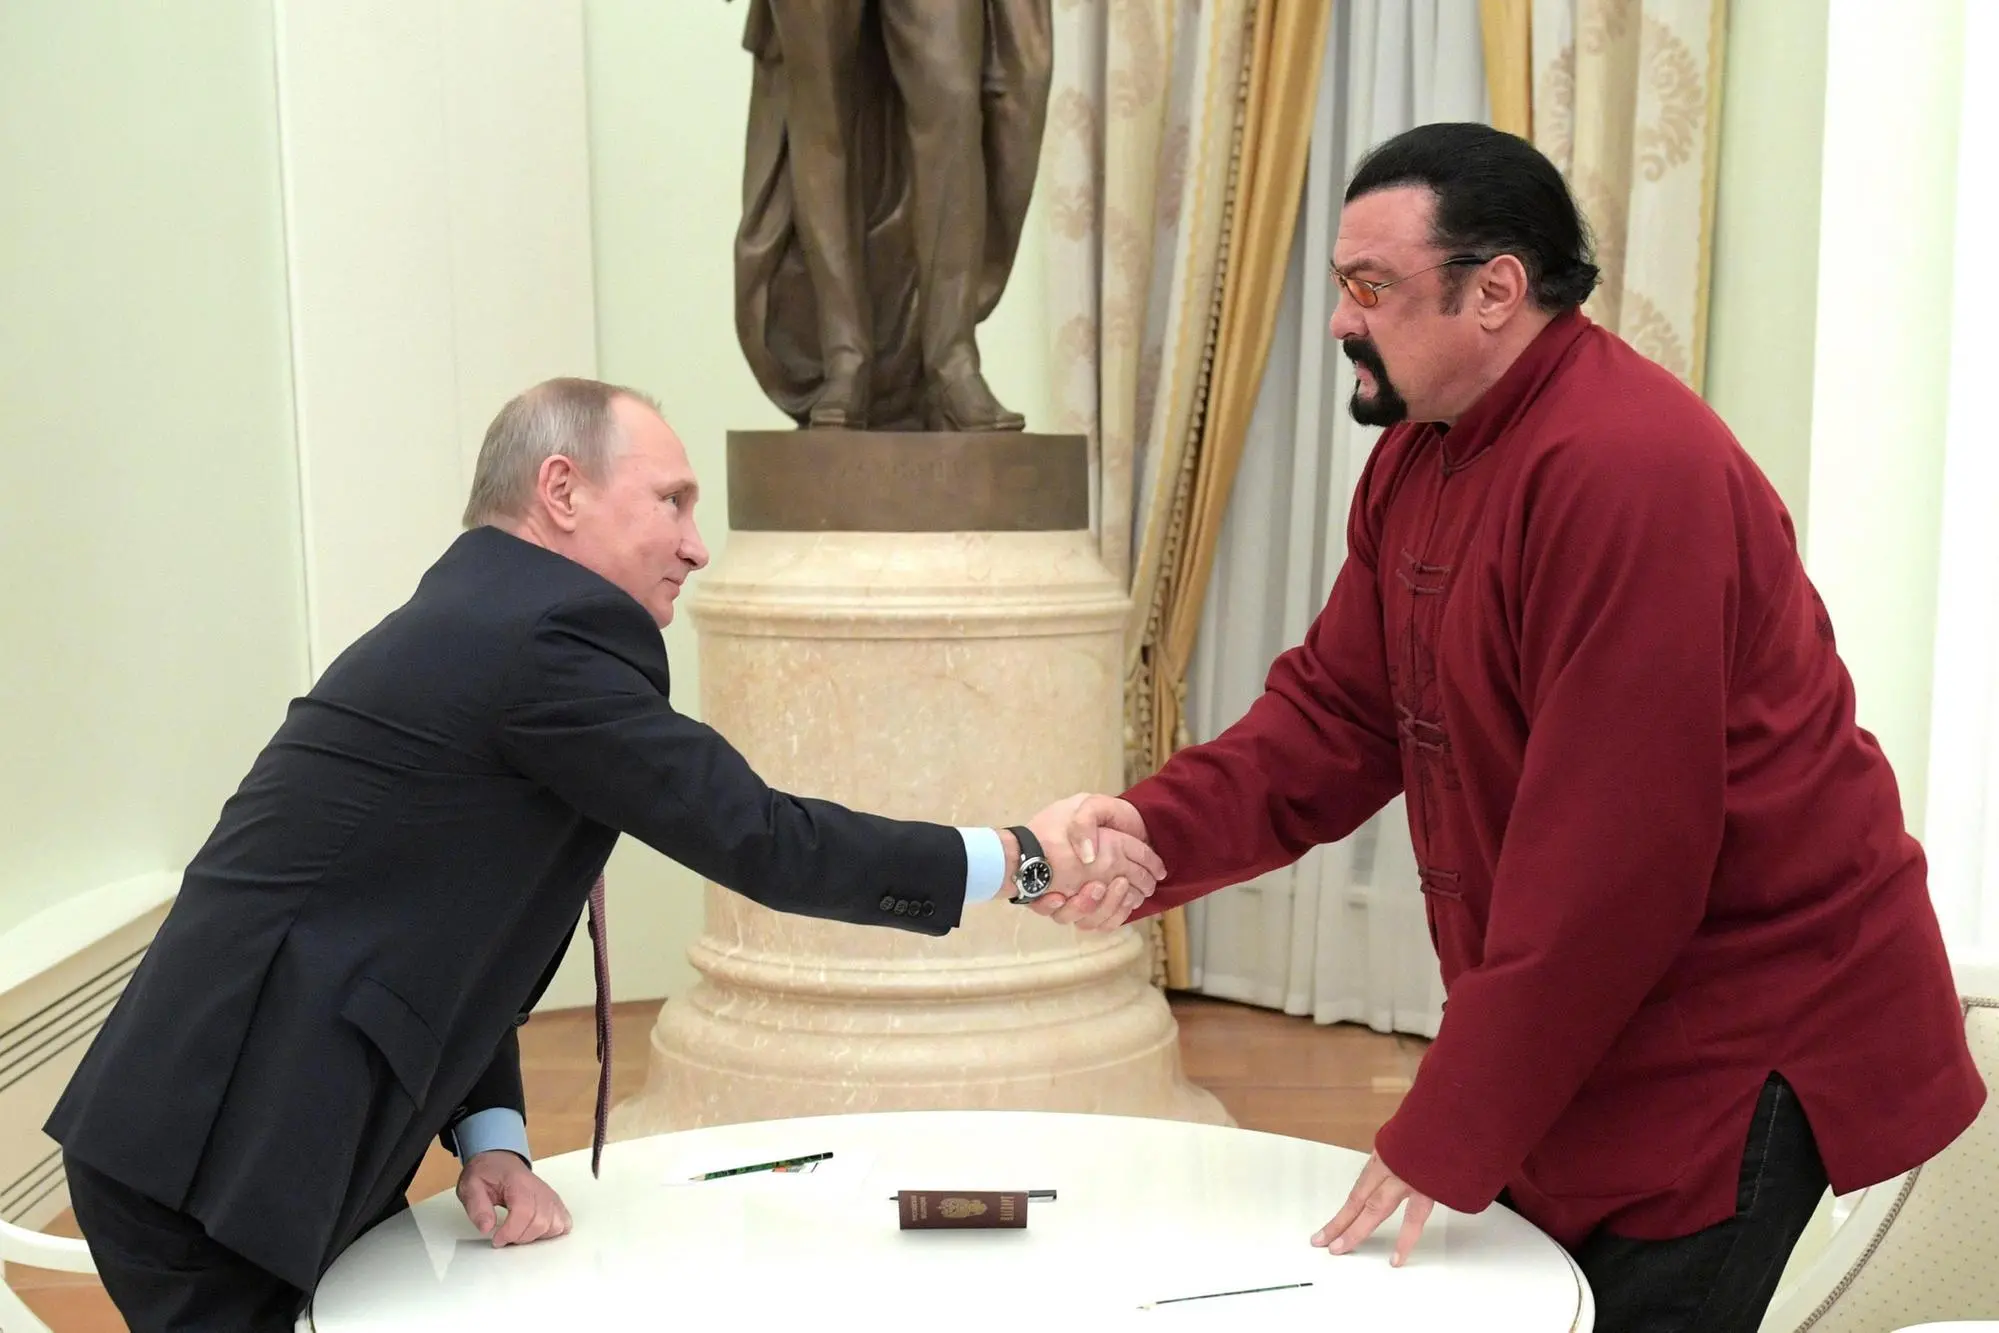 epa05647257 Russian President Vladimir Putin (L) shakes hands with US actor Steven Seagal (R) at the Kremlin in Moscow, Russia, 25 November 2016. The Russian President handed a Russian passport to Seagal and congratulated him on receiving Russian citizenship. EPA/ALEXEI DRUZHININ / SPUTNIK / KREMLIN POOL/POOL